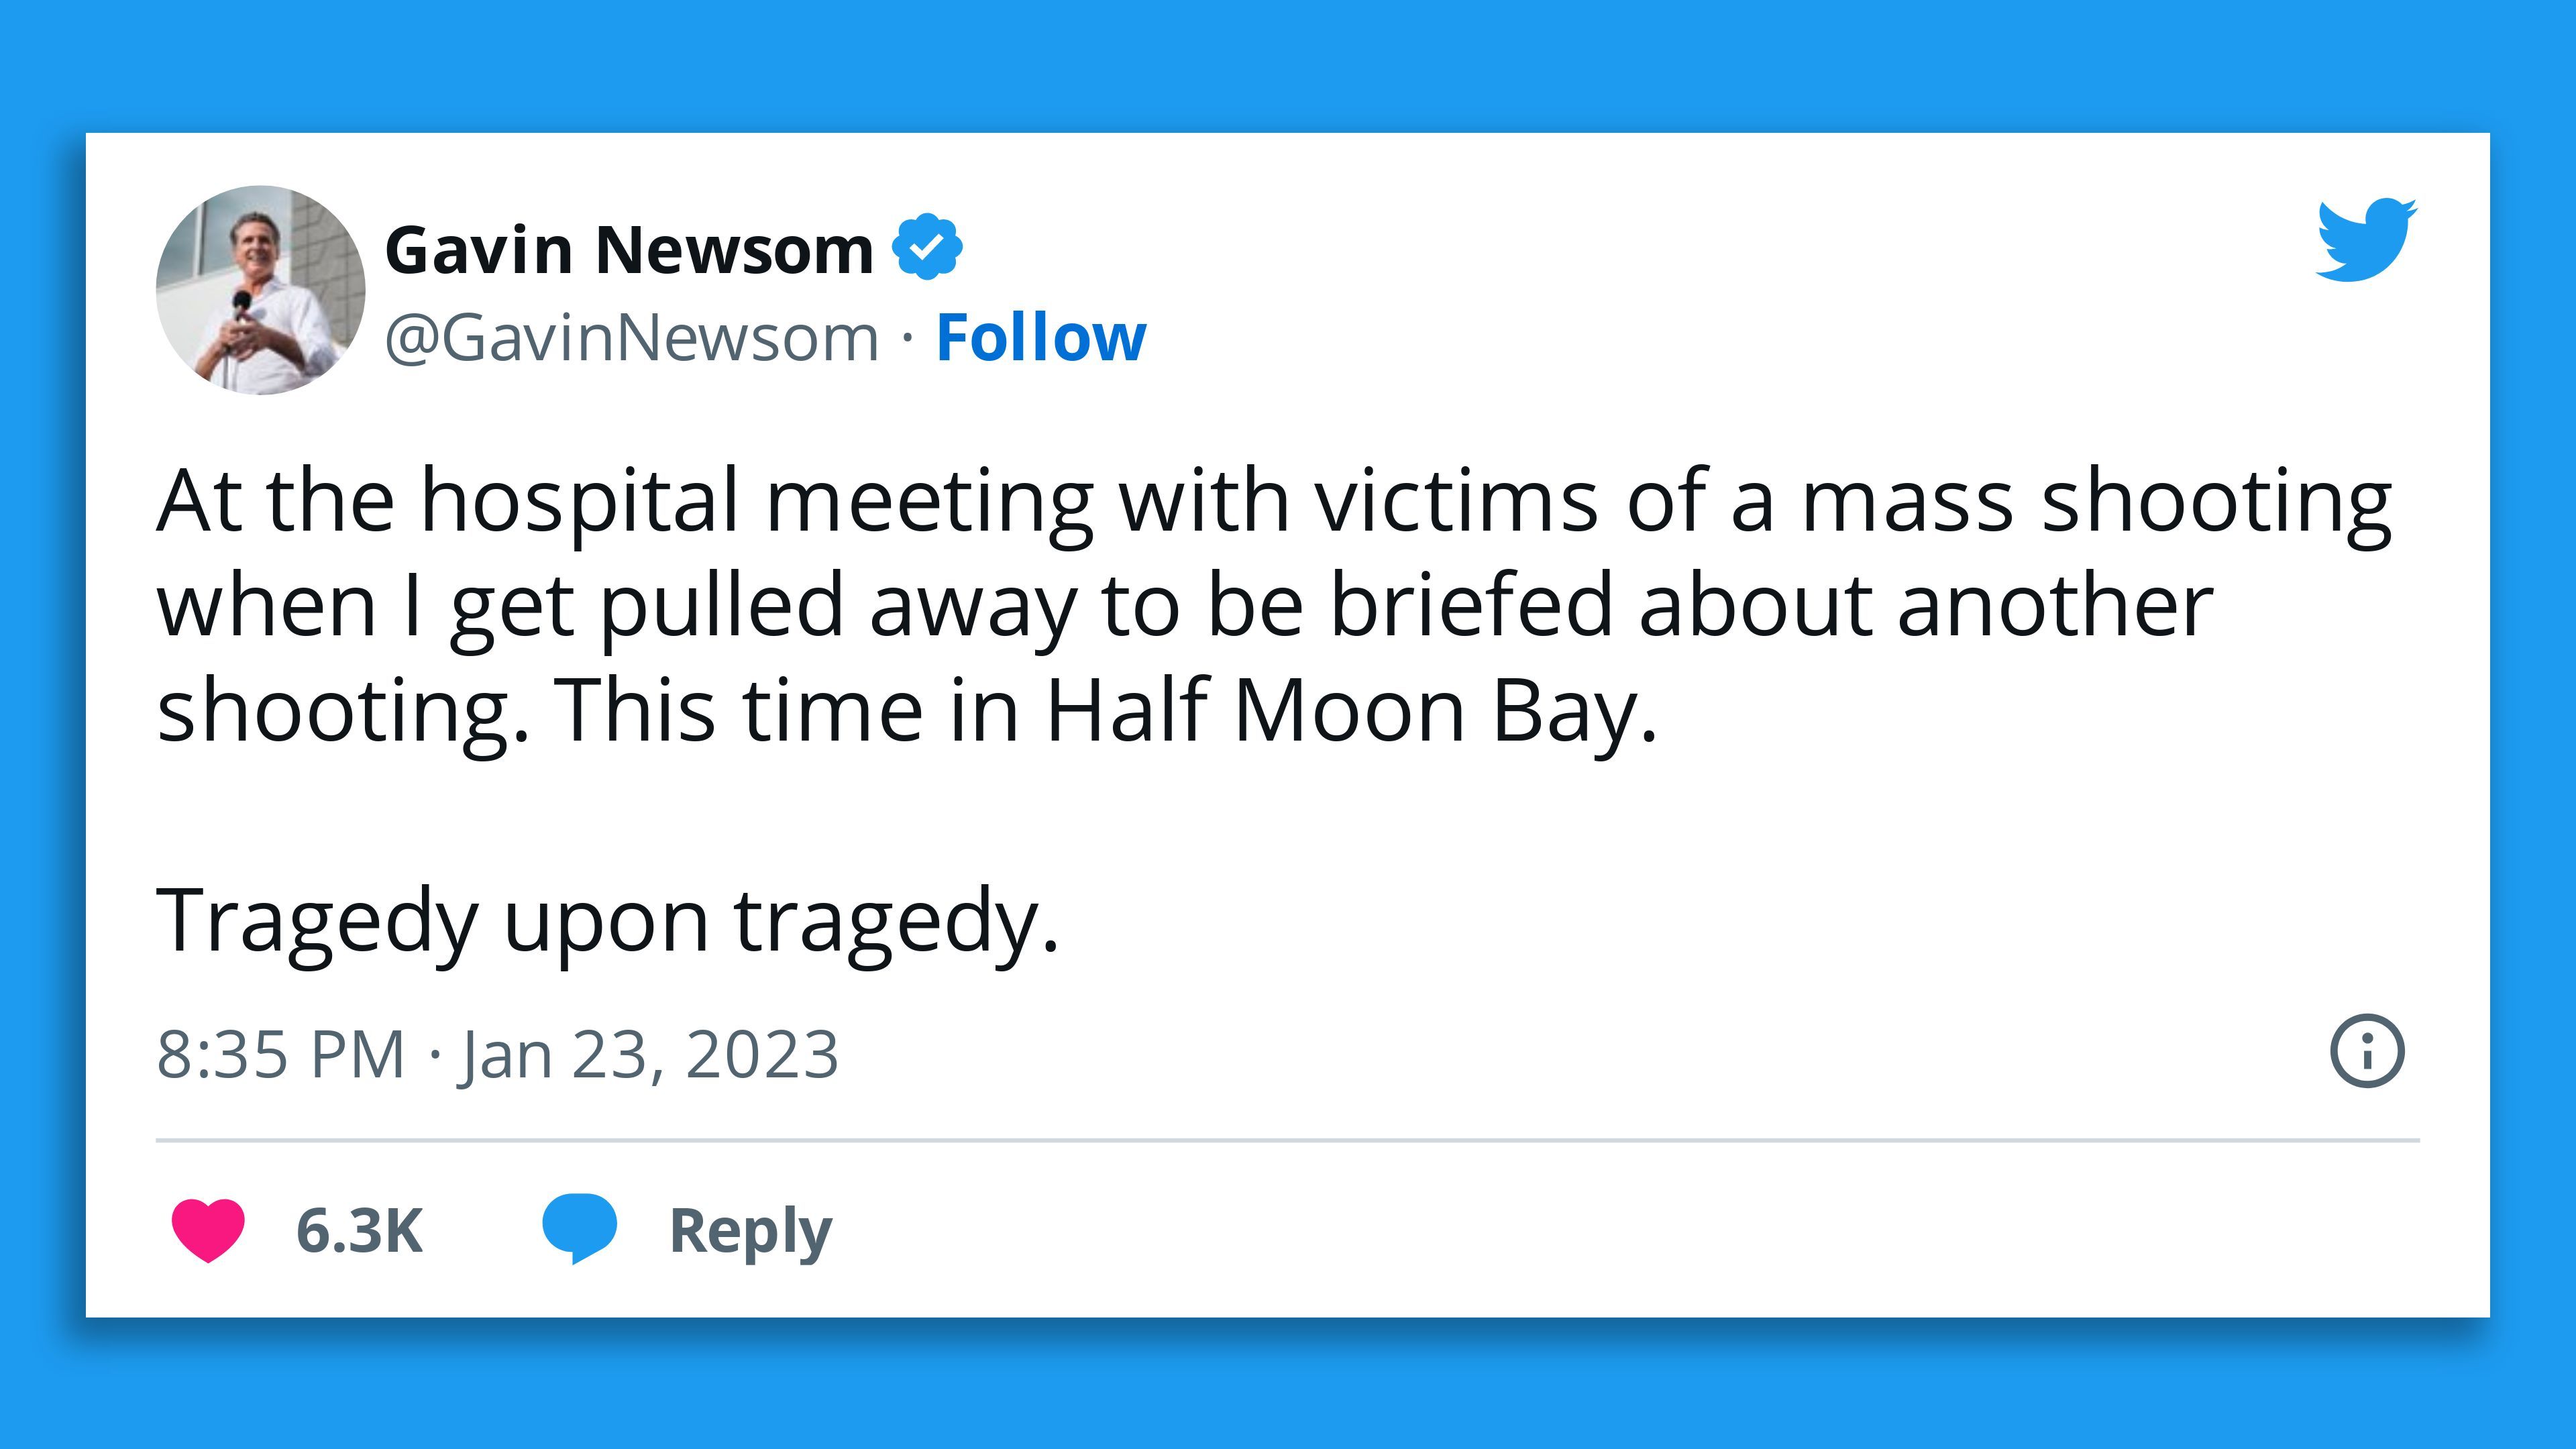 A screenshot of California Gov. Gavin Newsom's tweet: "At the hospital meeting with victims of a mass shooting when I get pulled away to be briefed about another shooting"